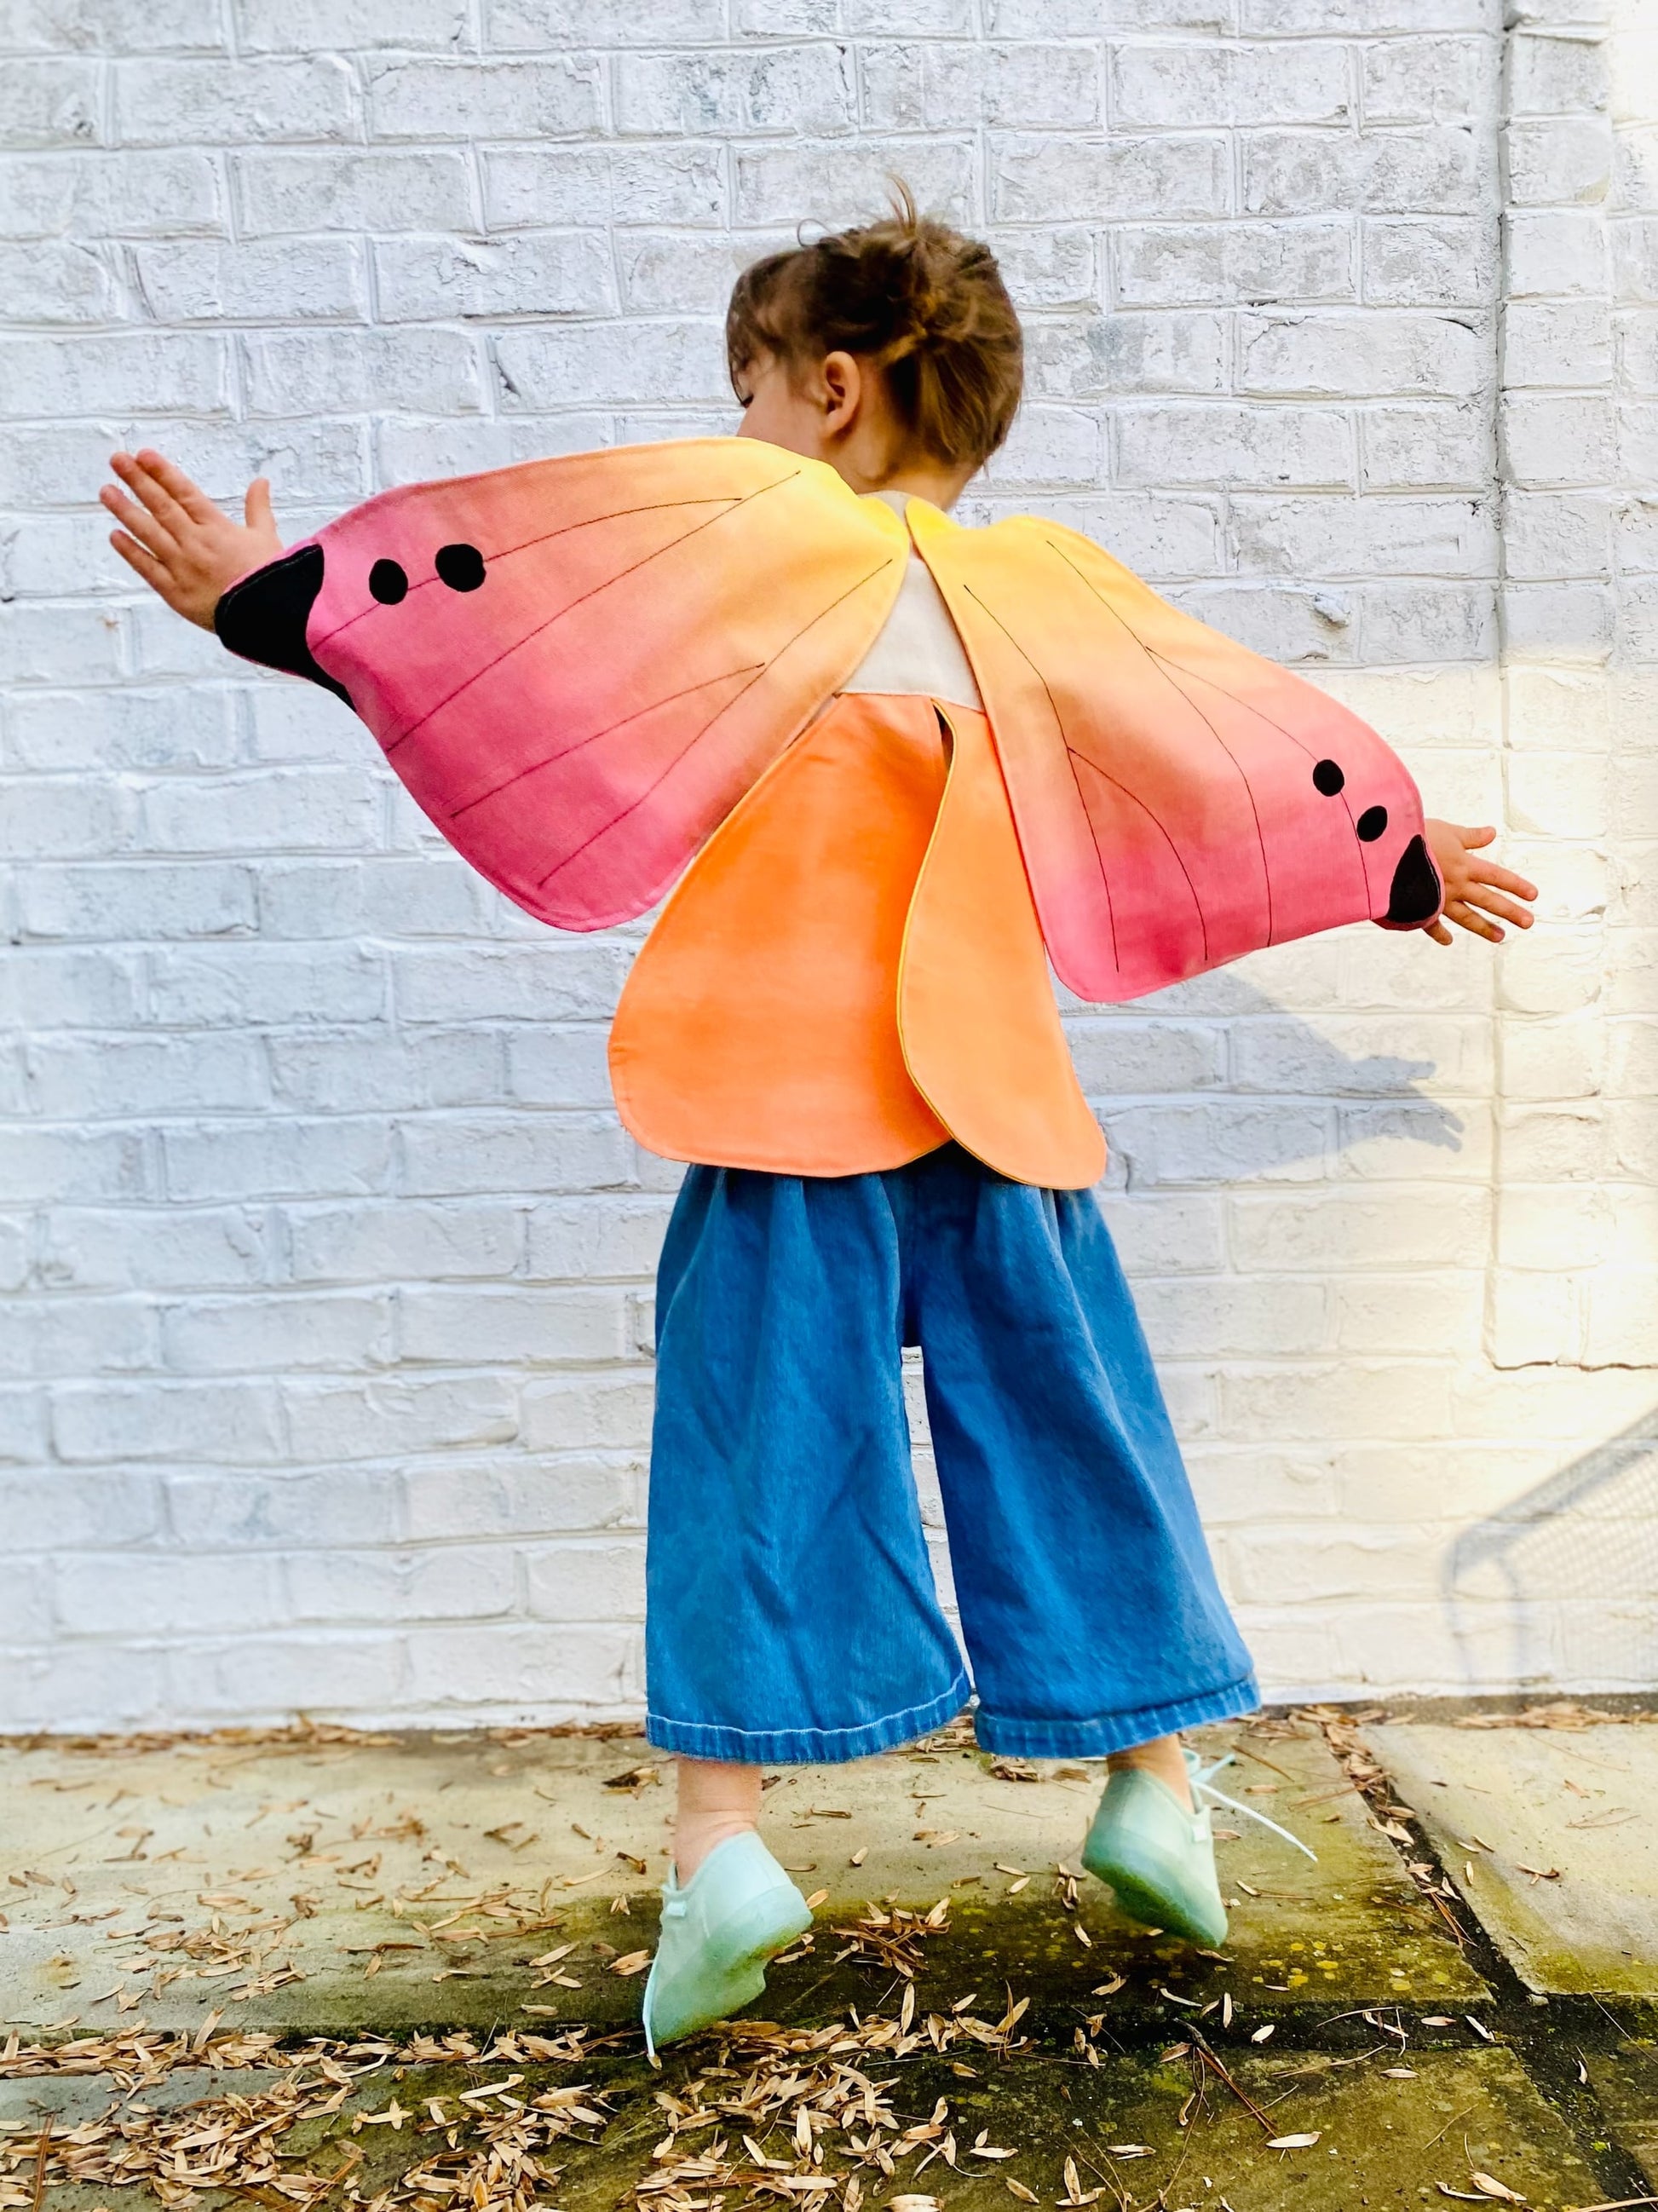 Girl fairy wings costume for imaginative play and dress up.